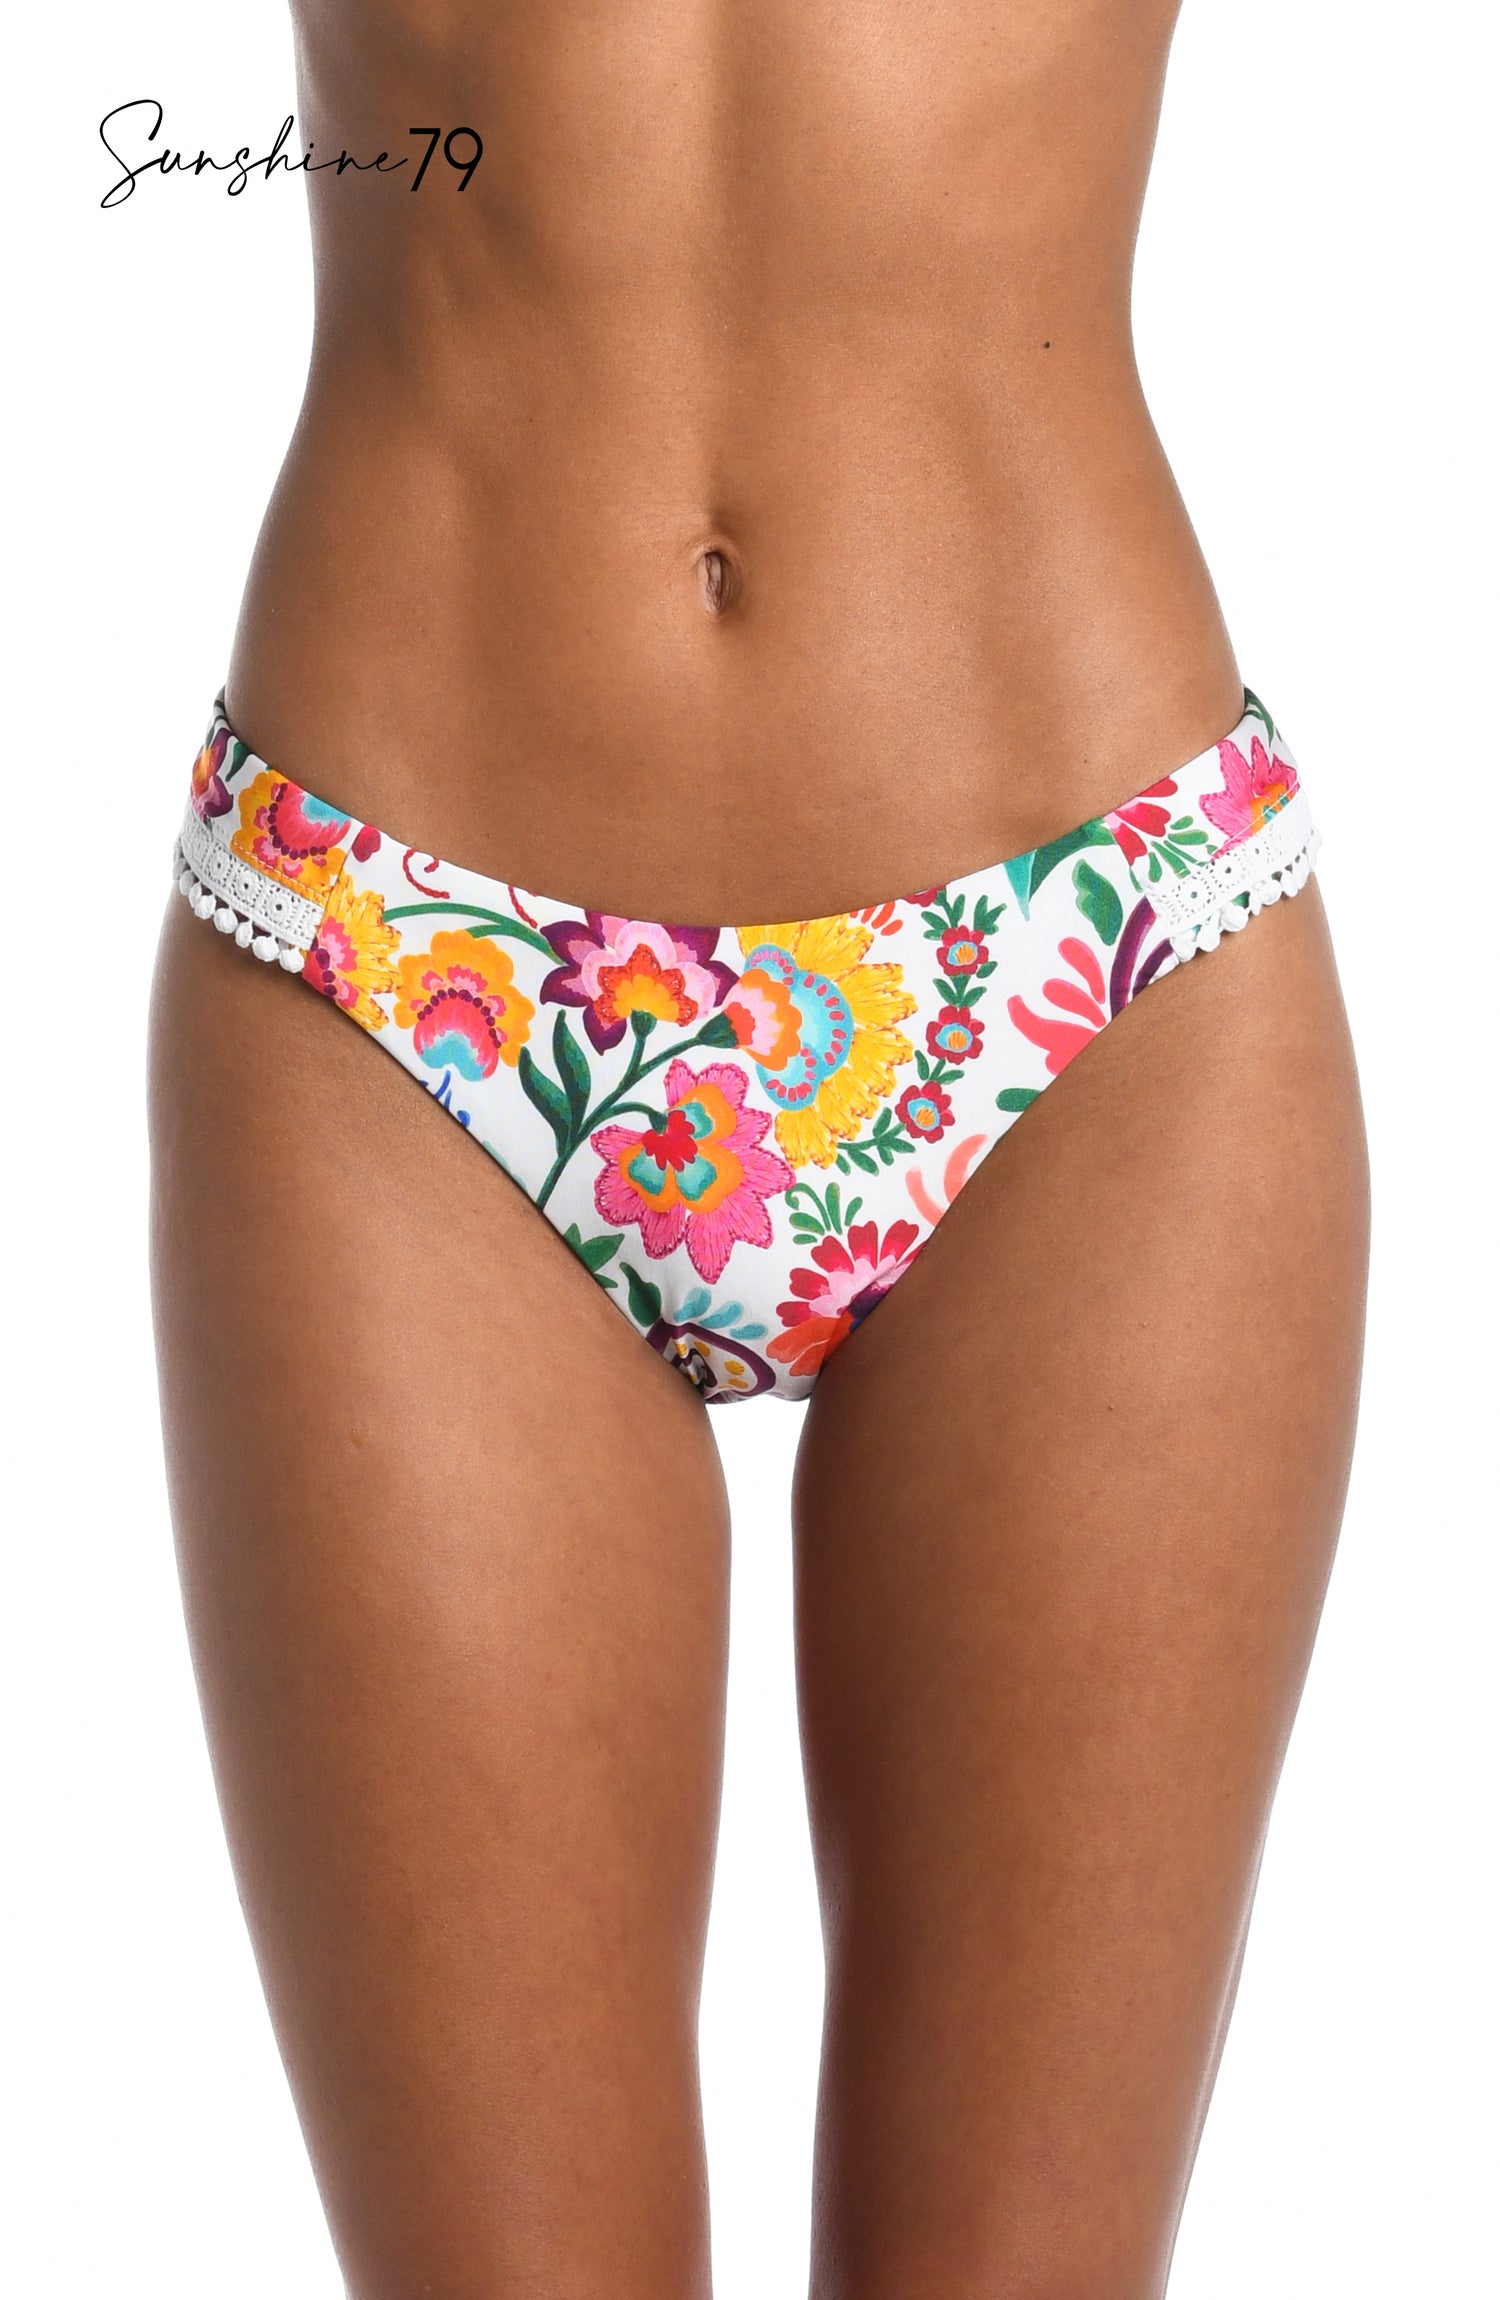 Model is wearing a multicolored spanish inspired printed french cut bikini bottom from our Sunshine 79 brand.